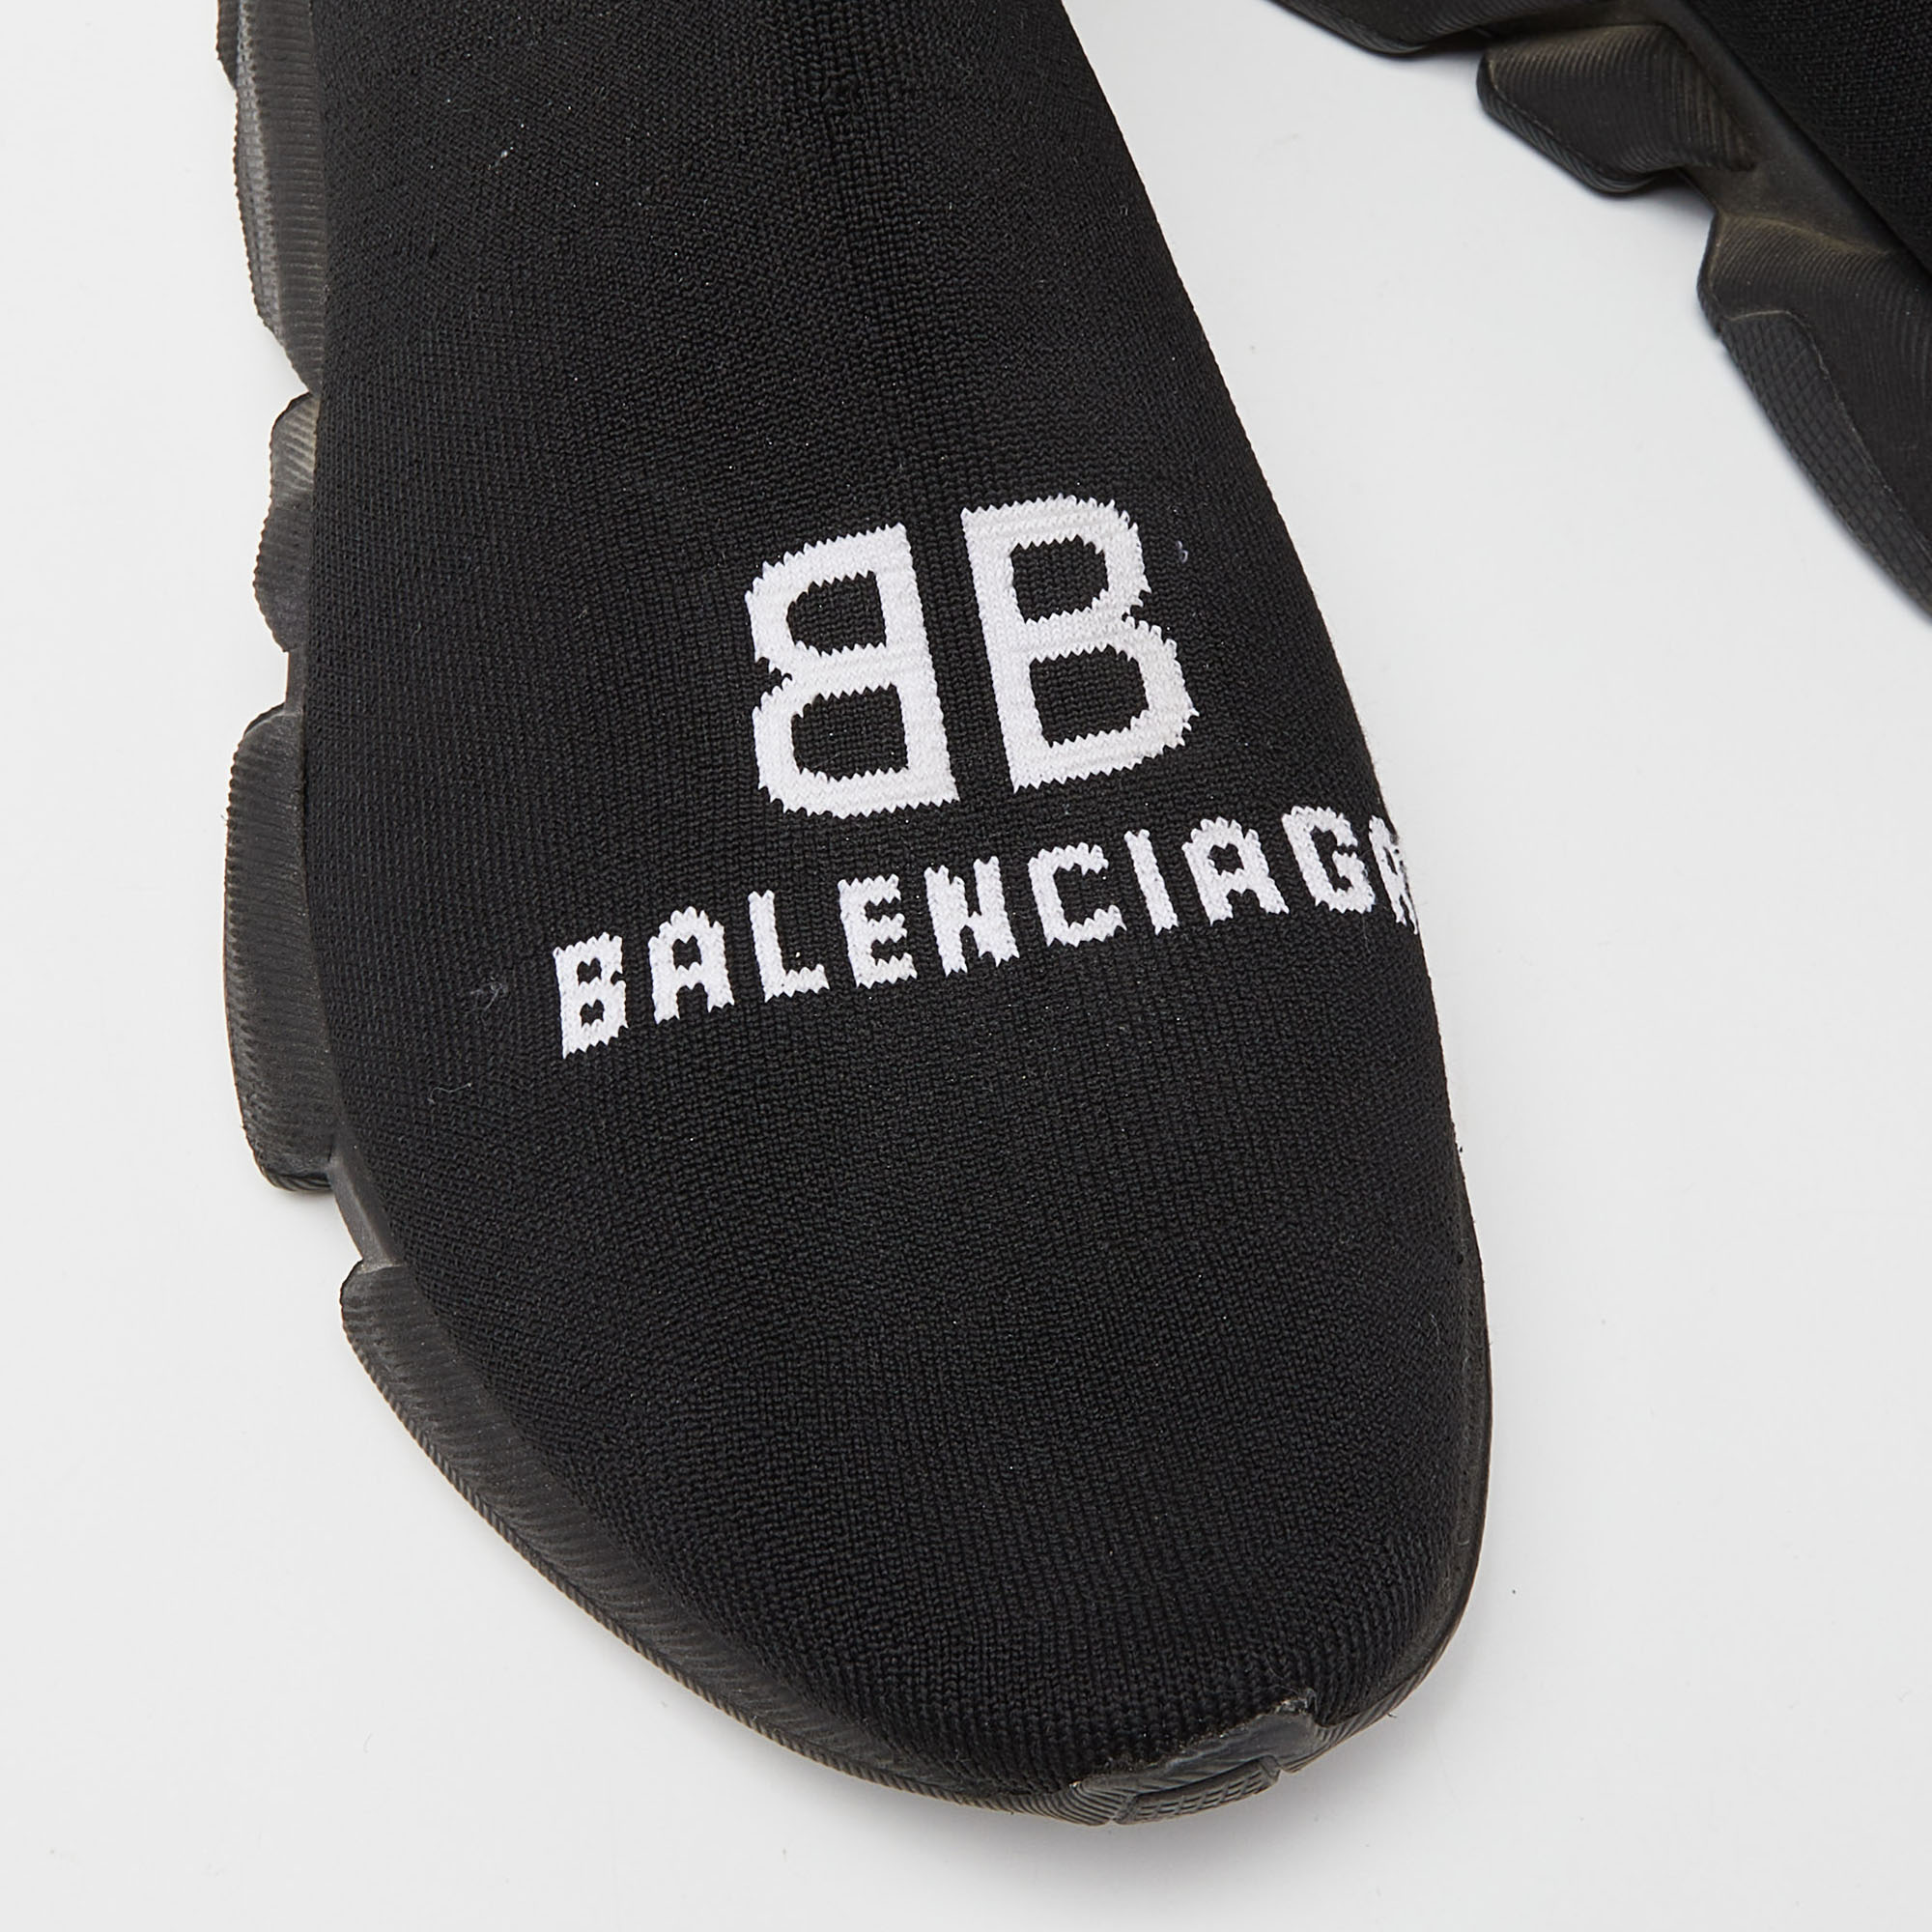 Balenciaga Black Knit Fabric Speed Trainer Sneakers Size 44